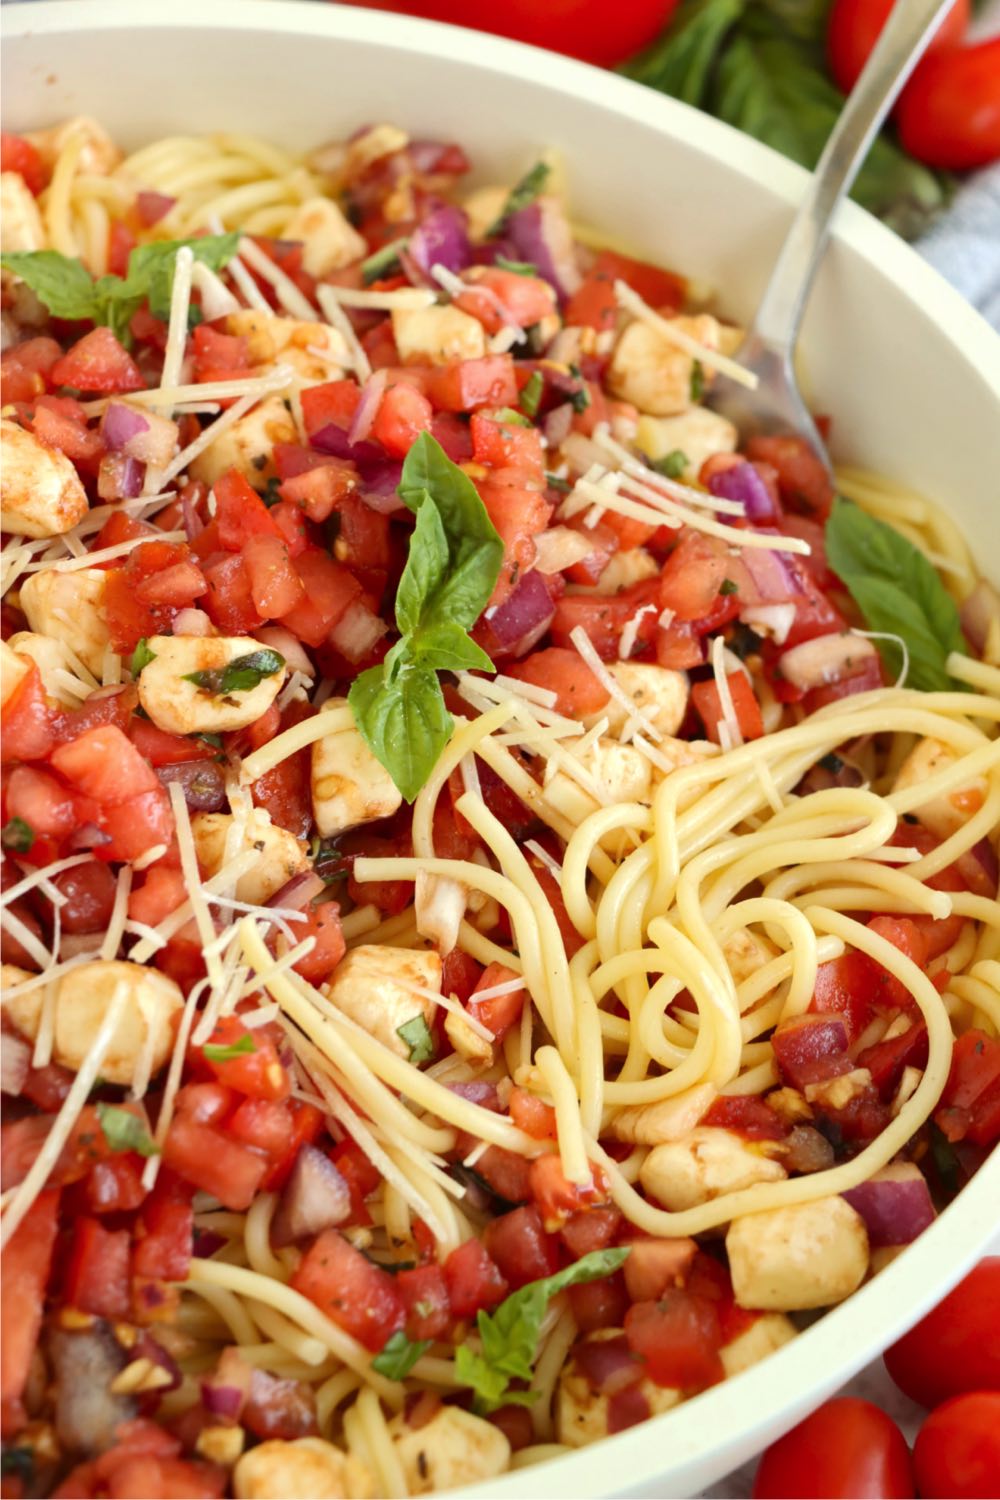 big white bowl filled with bruschetta pasta salad made with long spaghetti.